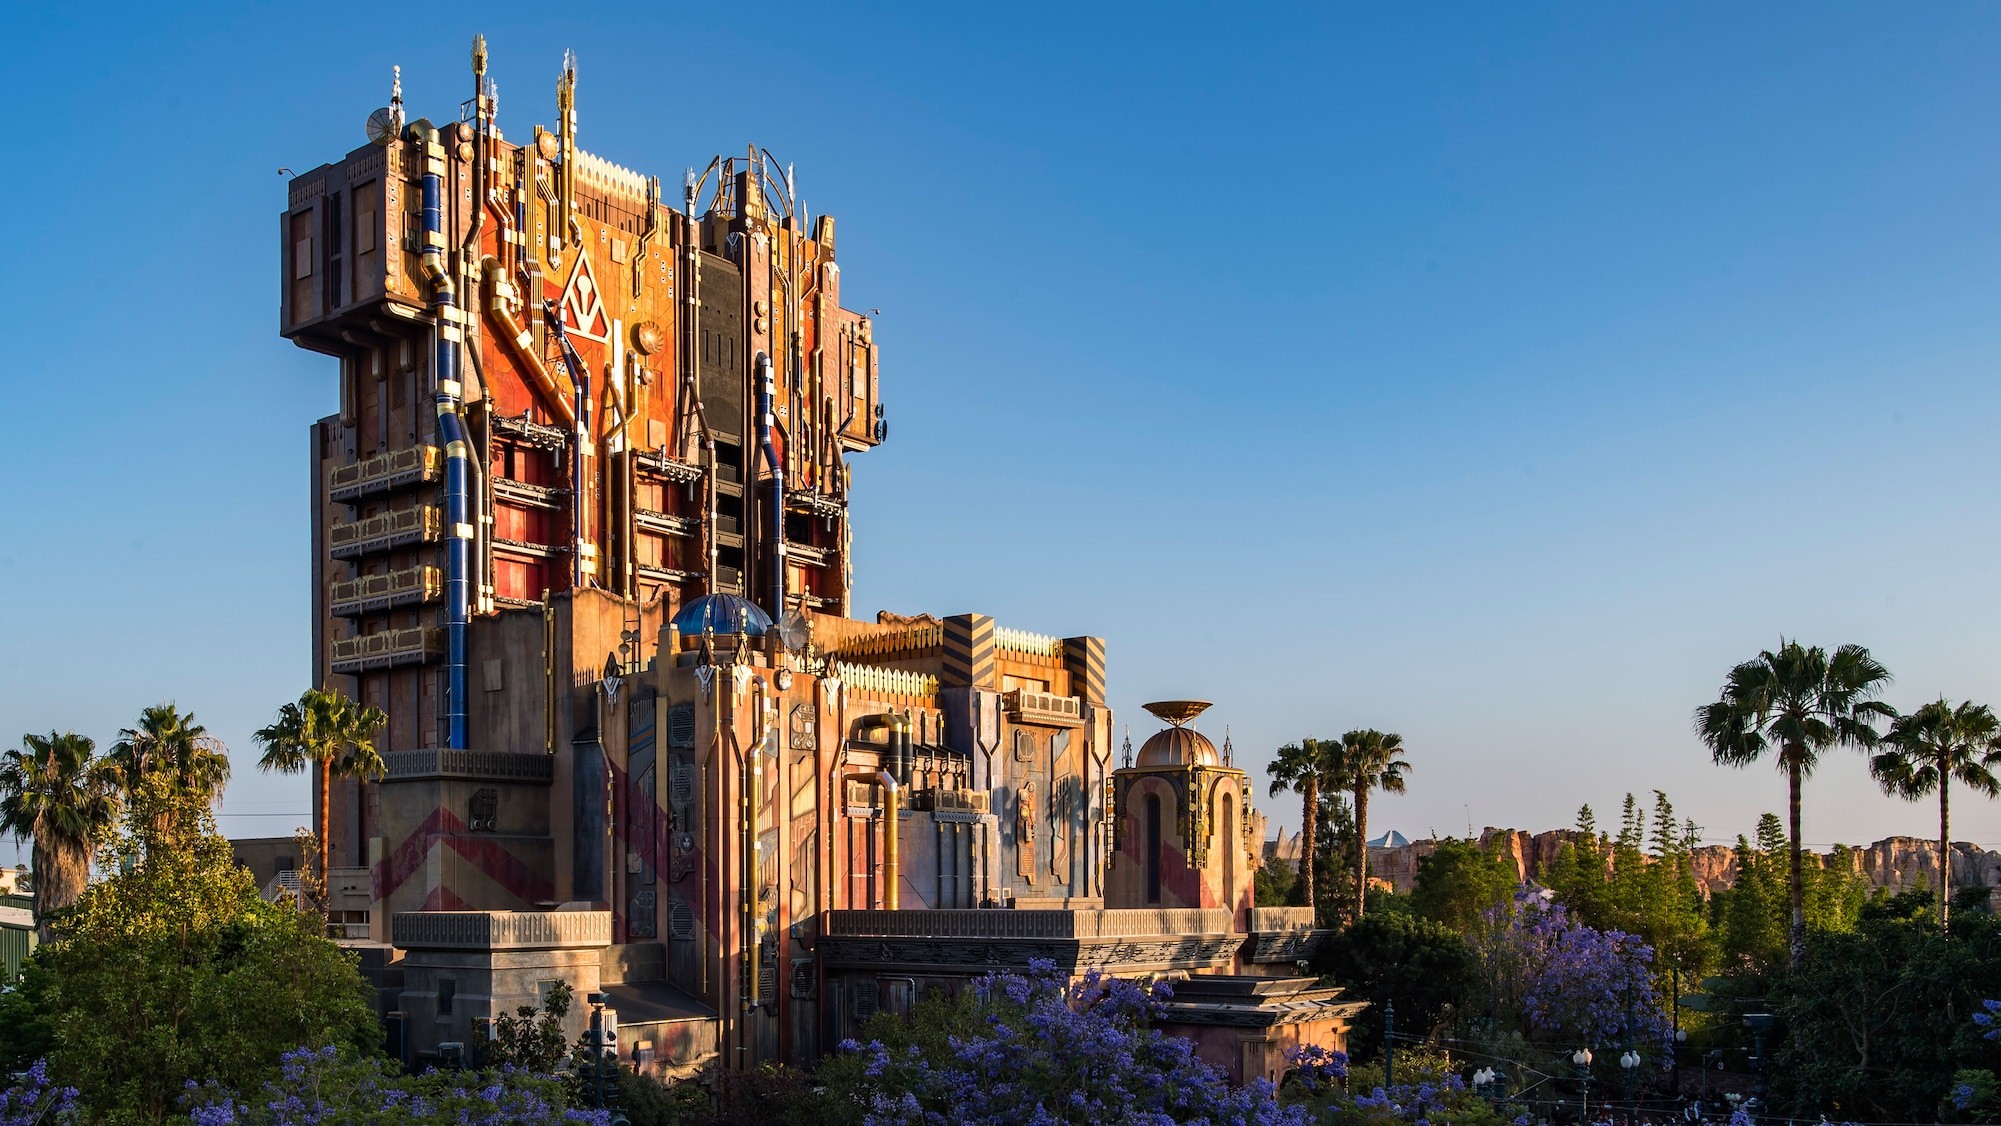 Disneyland Resort: Spider-Man and Dr Strange Were Considered For Guardians of the Galaxy Ride